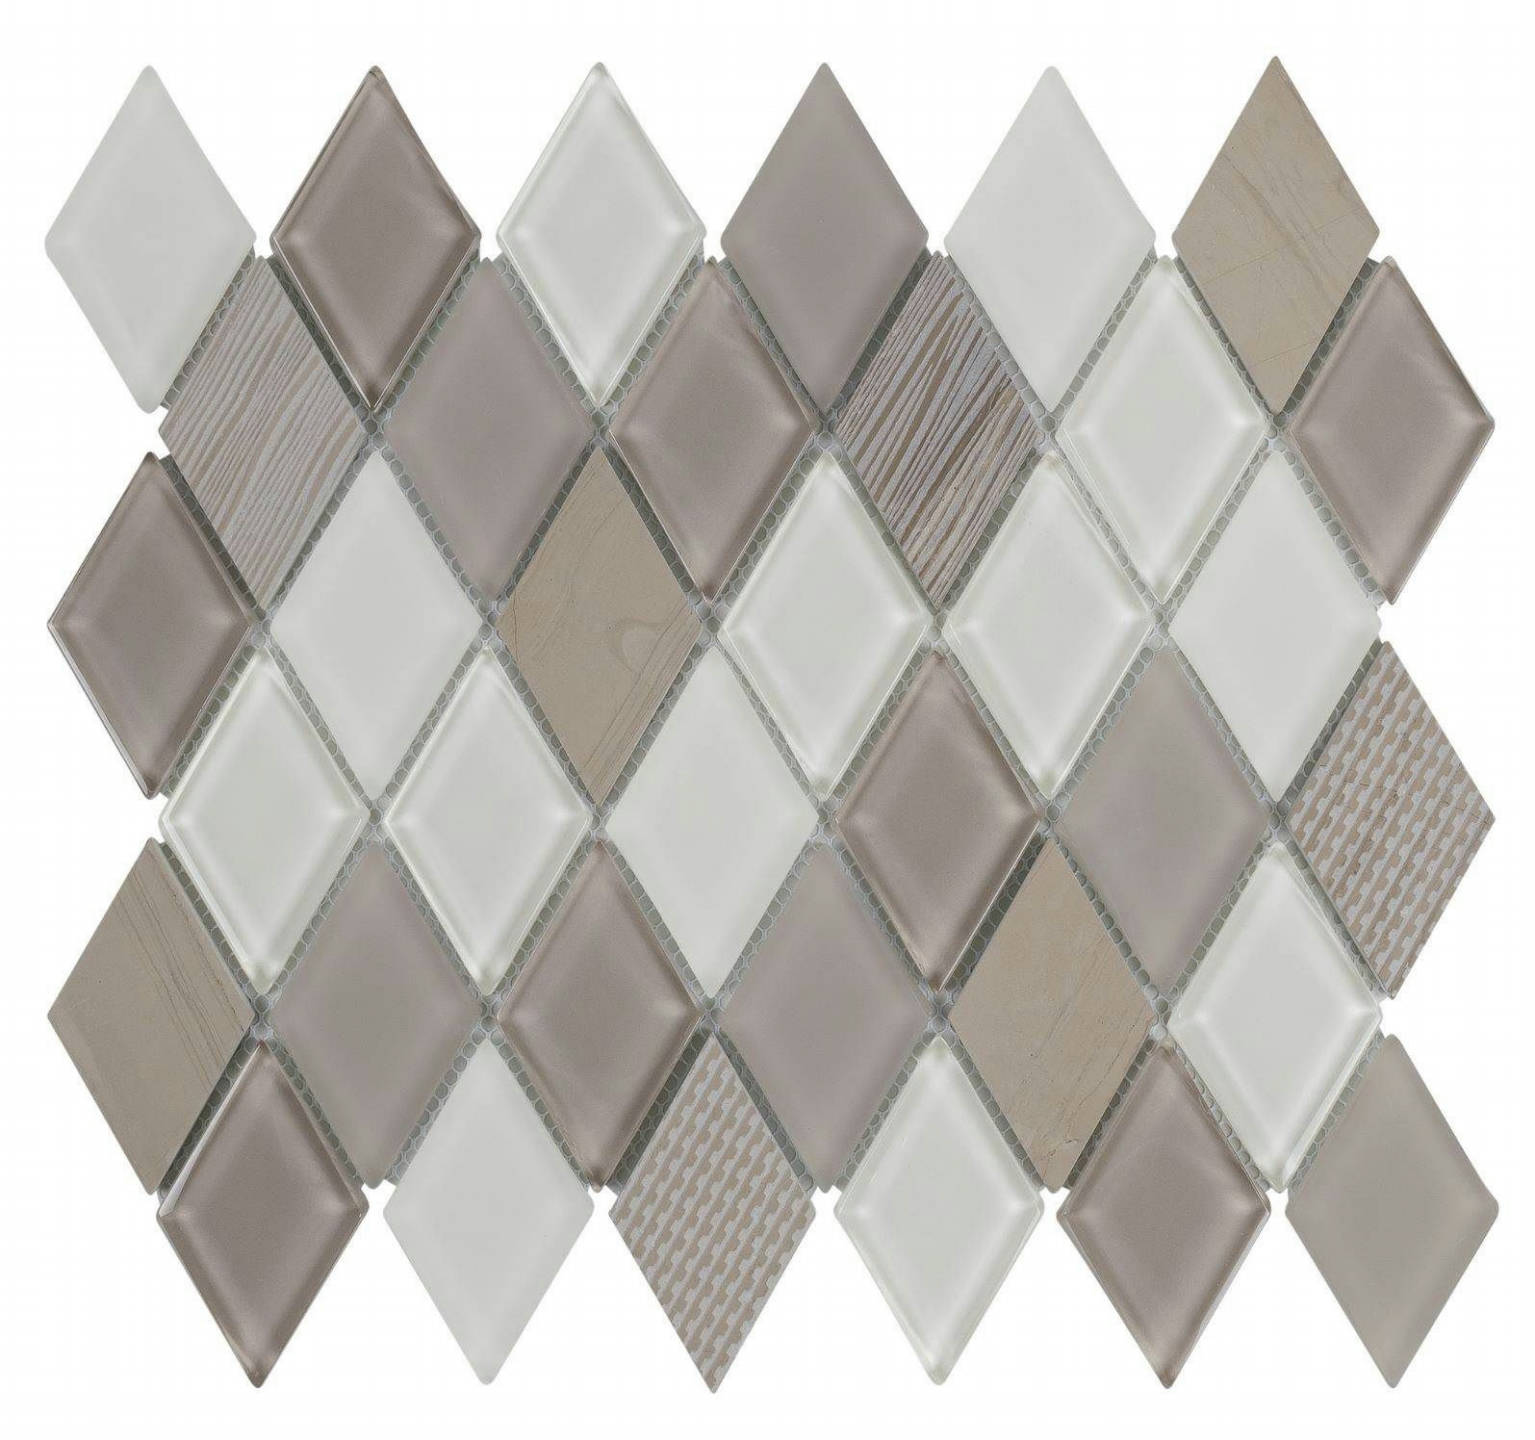 05D | Stones & More | Finest selection of Mosaics, Glass, Tile and Stone